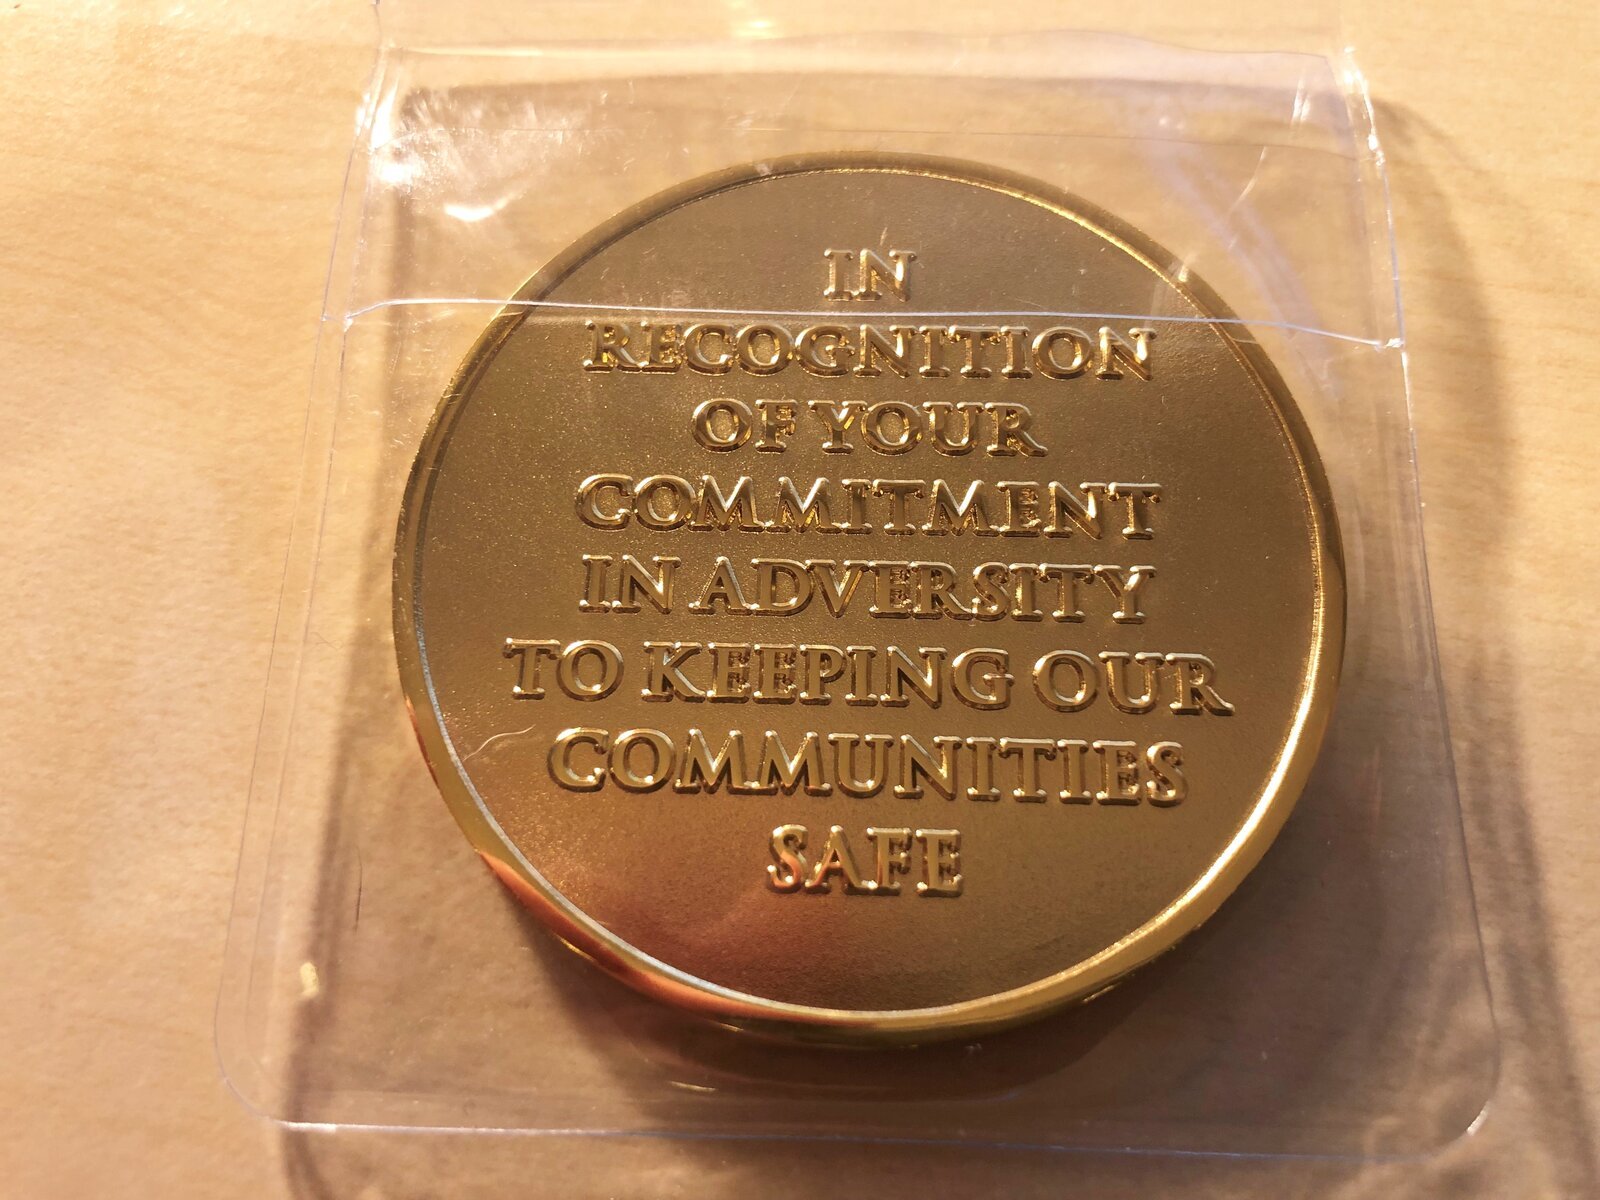 Commemorative coins were sent to Thames Valley Police staff and volunteers. Images via online forum user.